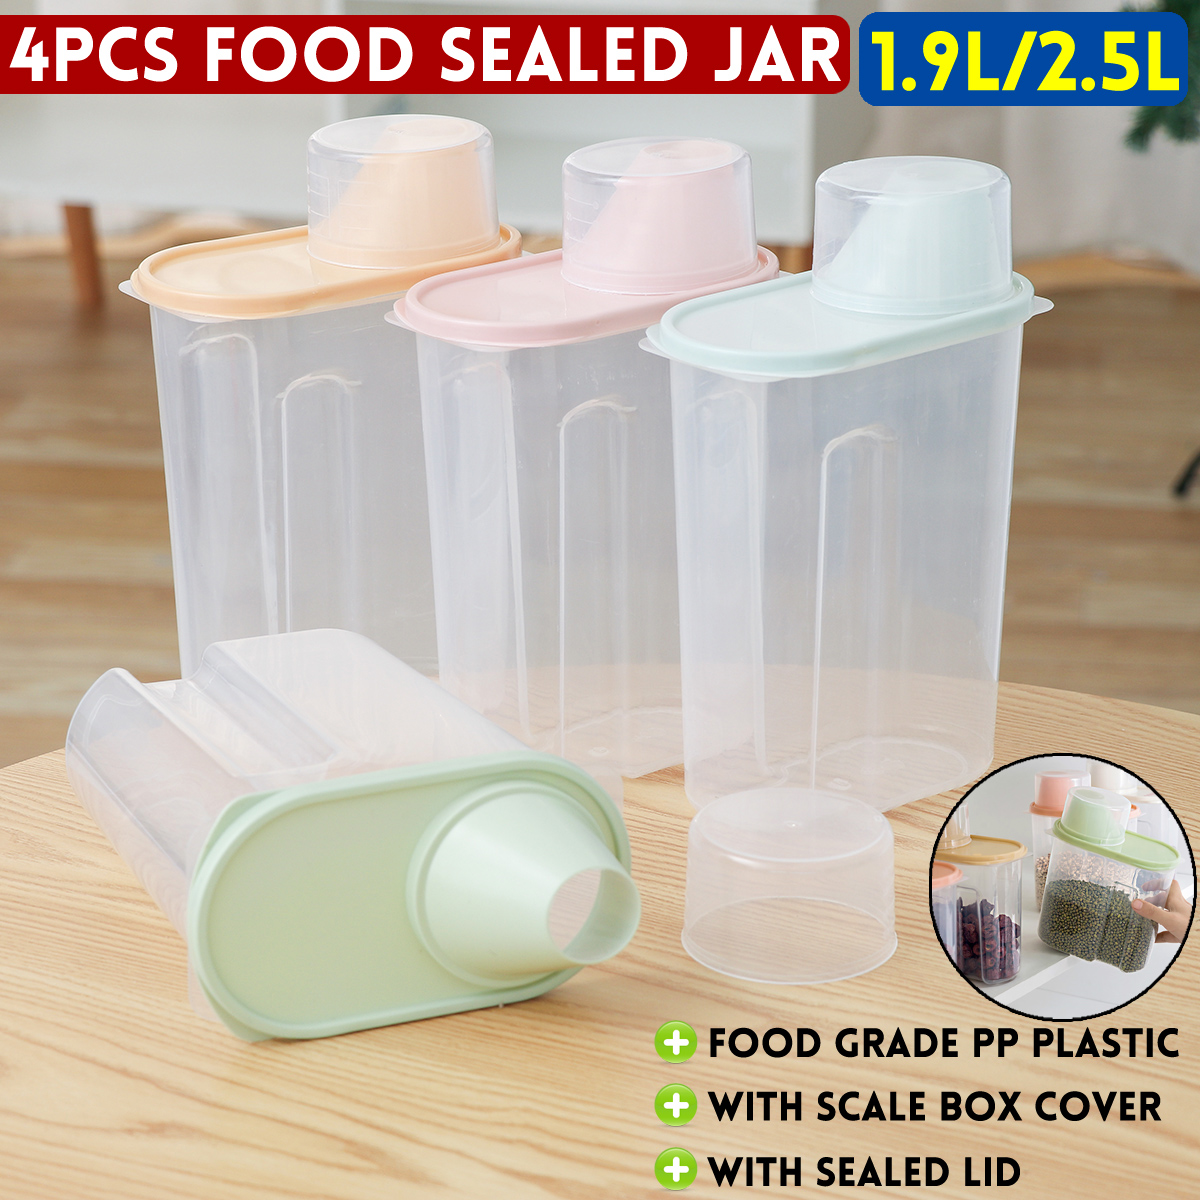 4Pcs-Cereal-Storage-Box-Plastic-Rice-Container-Food-Sealed-Jar-Cans-Kitchen-Grain-Dried-Fruit-Snacks-1730653-2